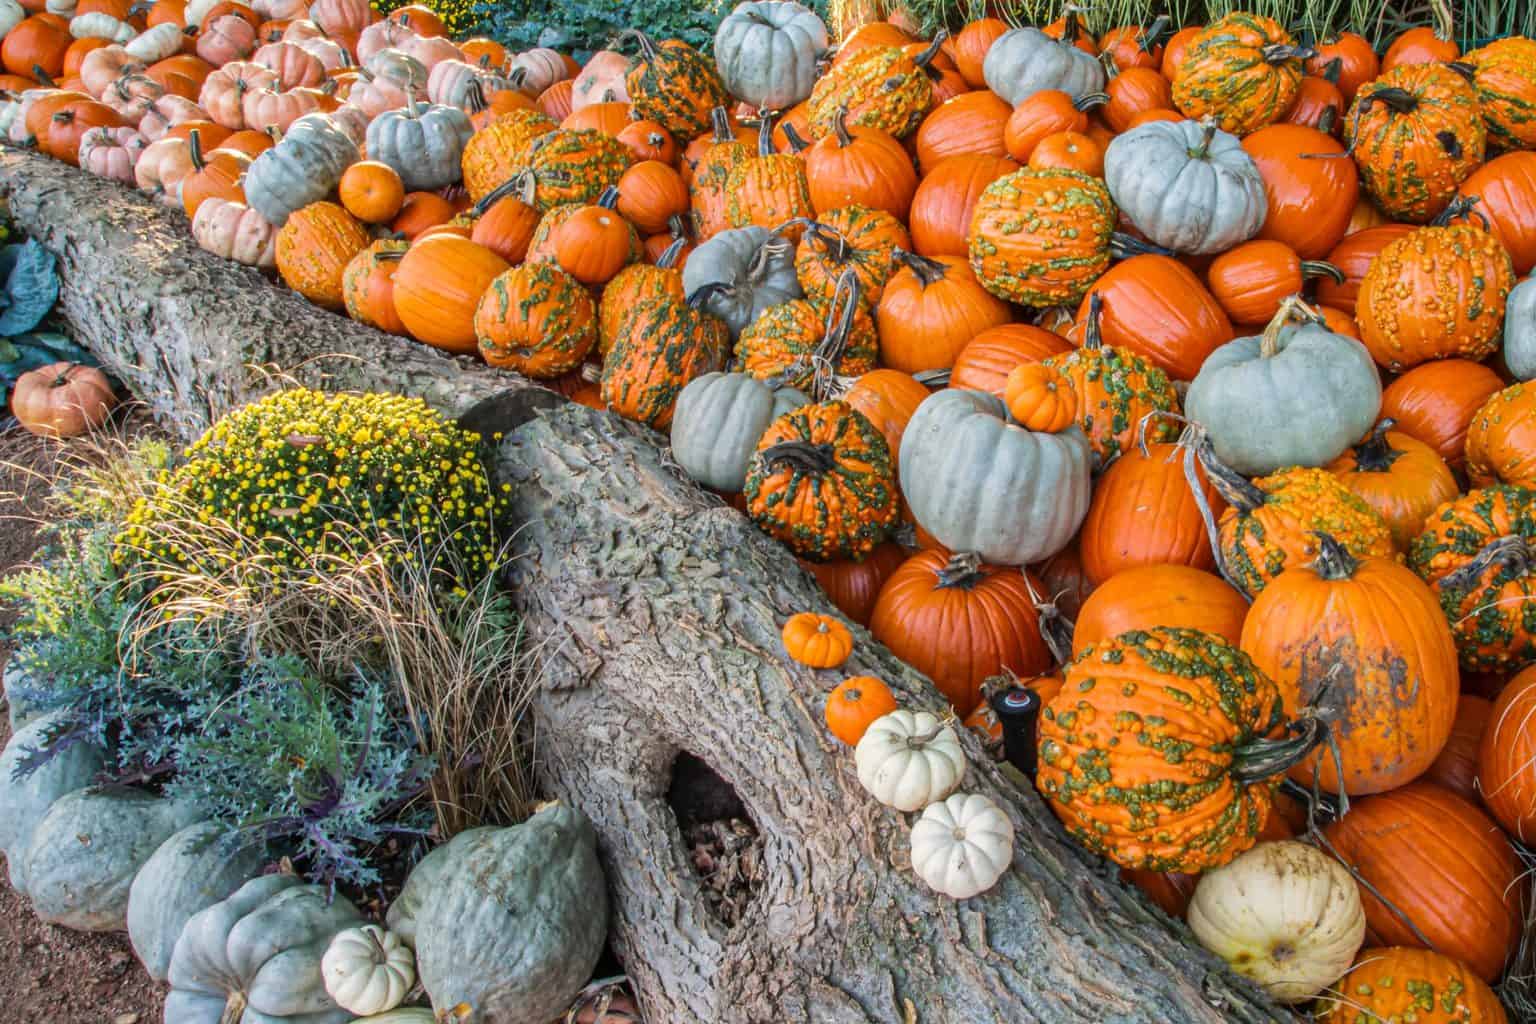 A pile of pumpkins with different sizes and shapes